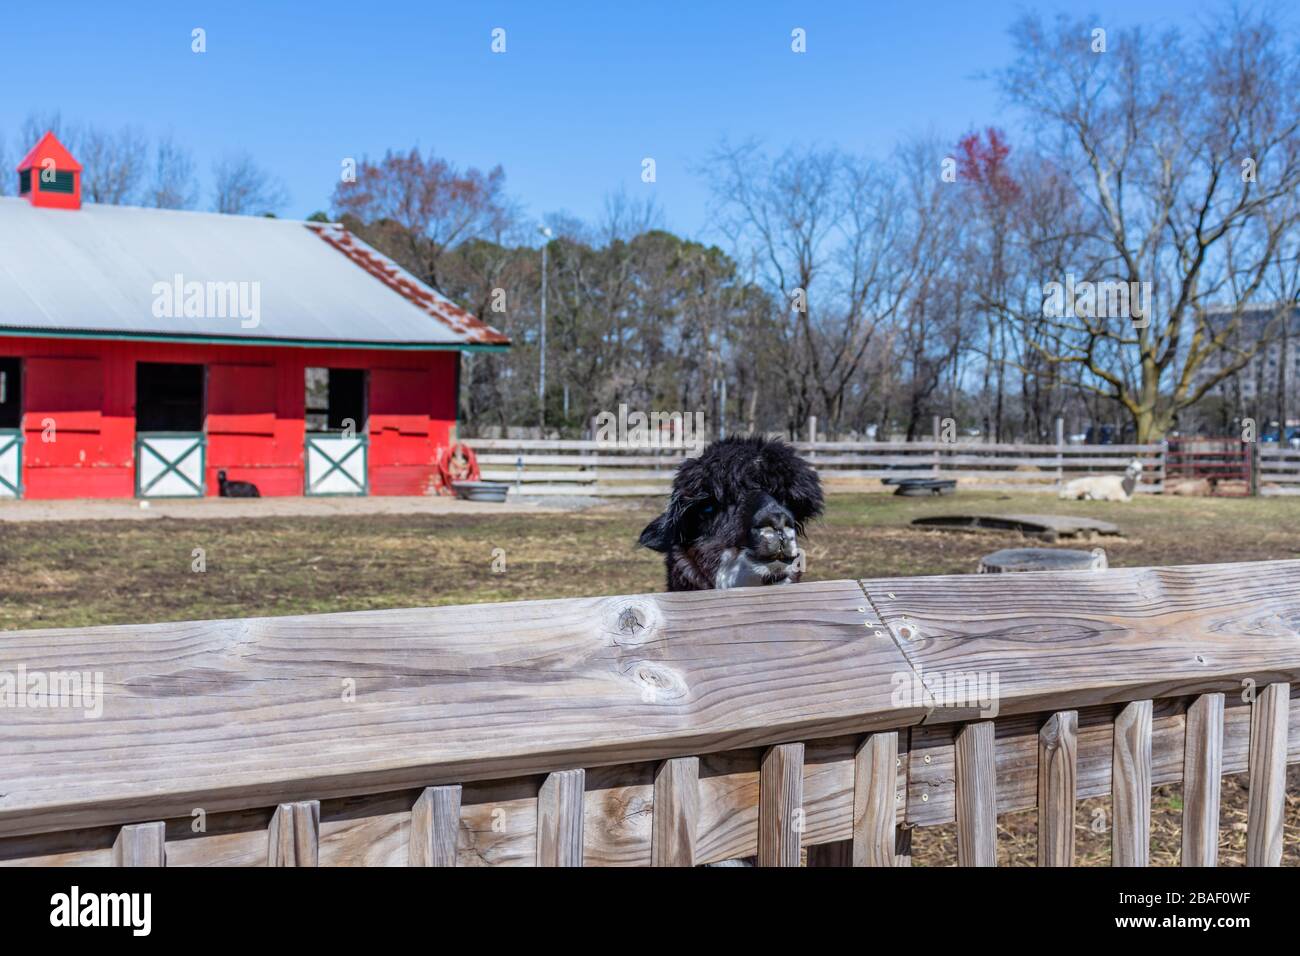 Hampton, Virginia/USA-March 1, 2020: The head of a black and white alpaca poking out from over the top of a wooden fence in Bluebird Gap Farm Park in Stock Photo